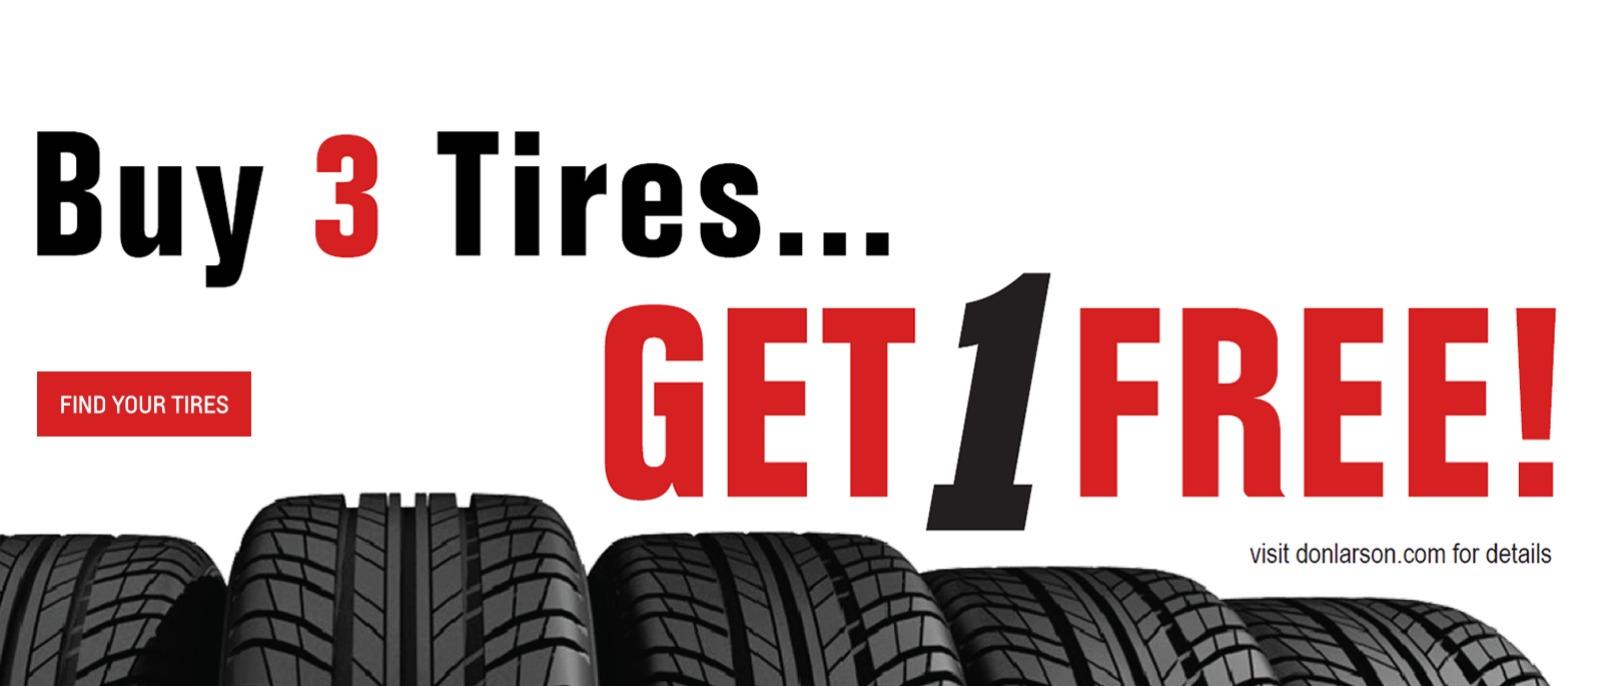 Buy three tires get one free promotion